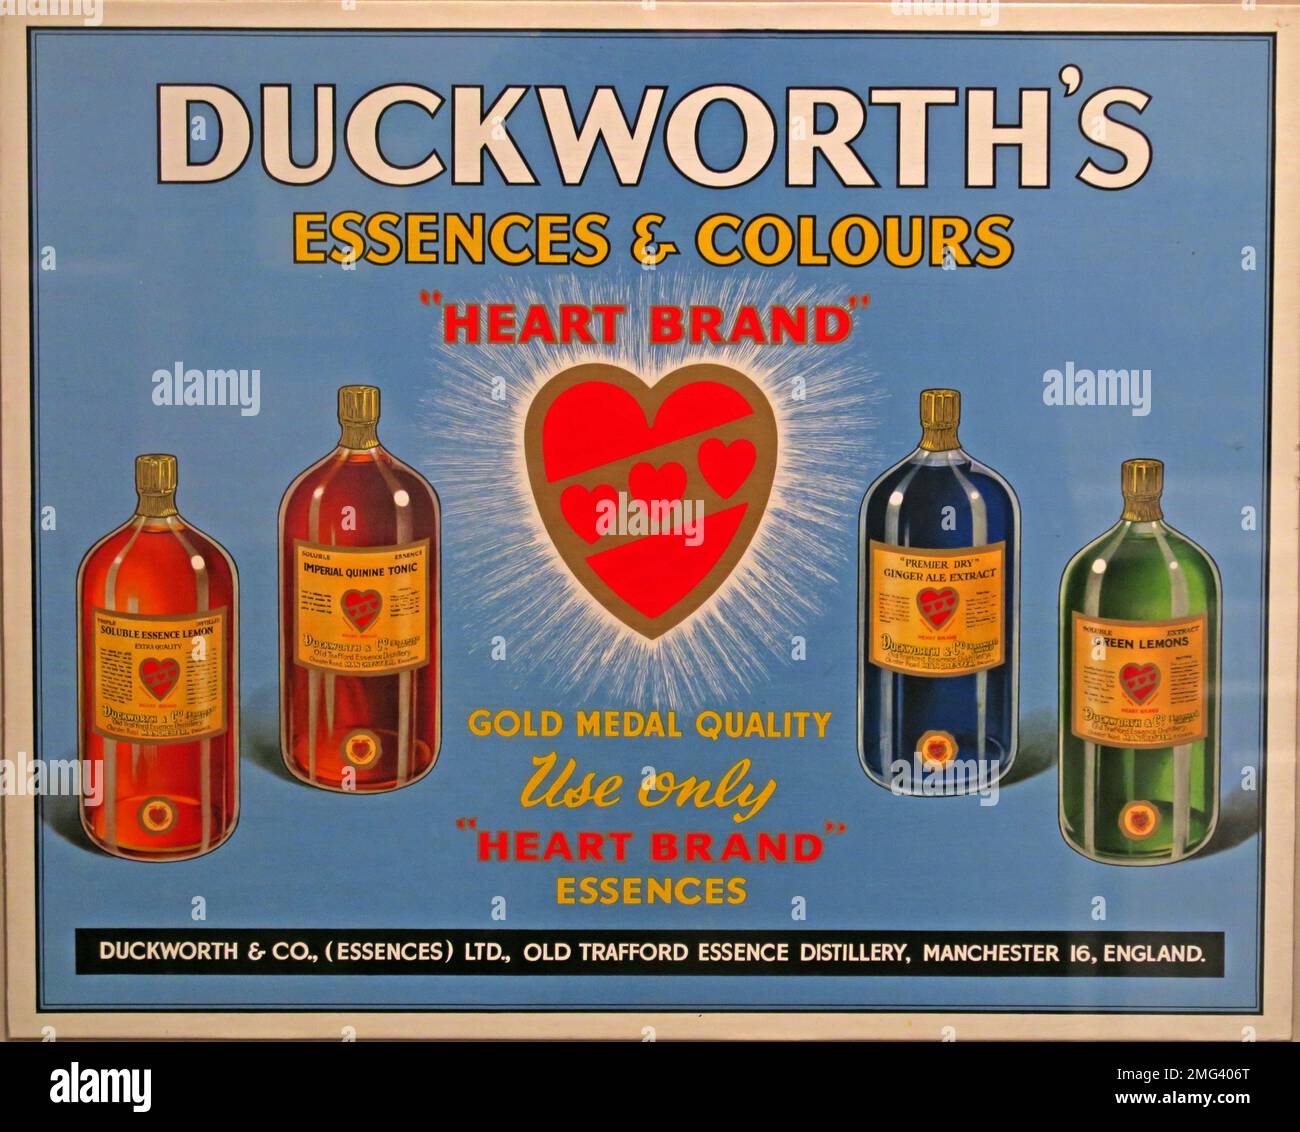 Duckworths Essences & Colours, Heart Brand, poster from the Old Trafford Essence Distillery, Manchester 16, England, UK Stock Photo